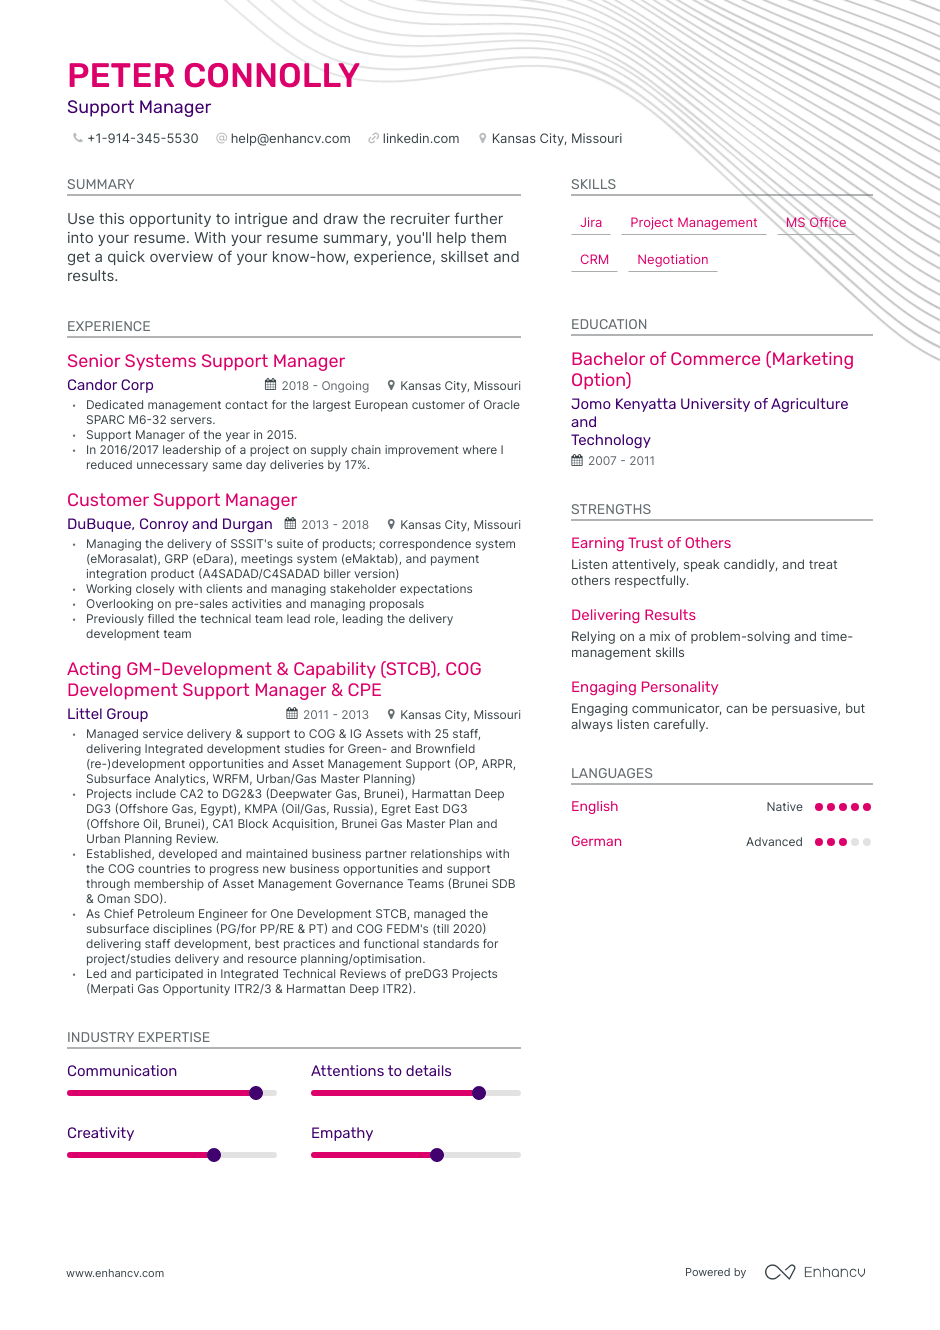 Support Manager resume example